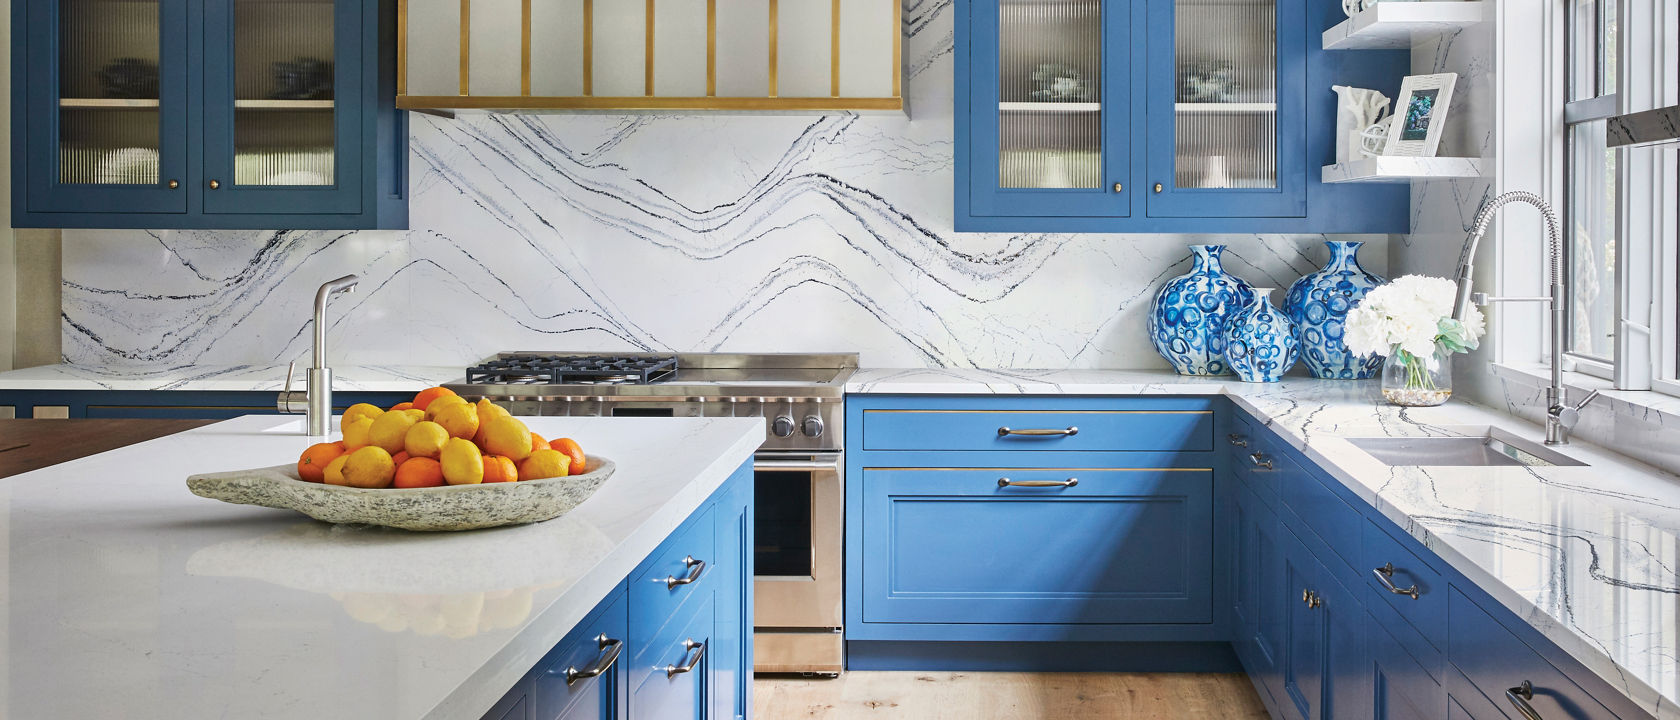 a luxurious blue and white kitchen with sky blue upper and lower cabinets, white quartz countertops with blue veining and matching quartz backsplash, with gold accents throughout. 